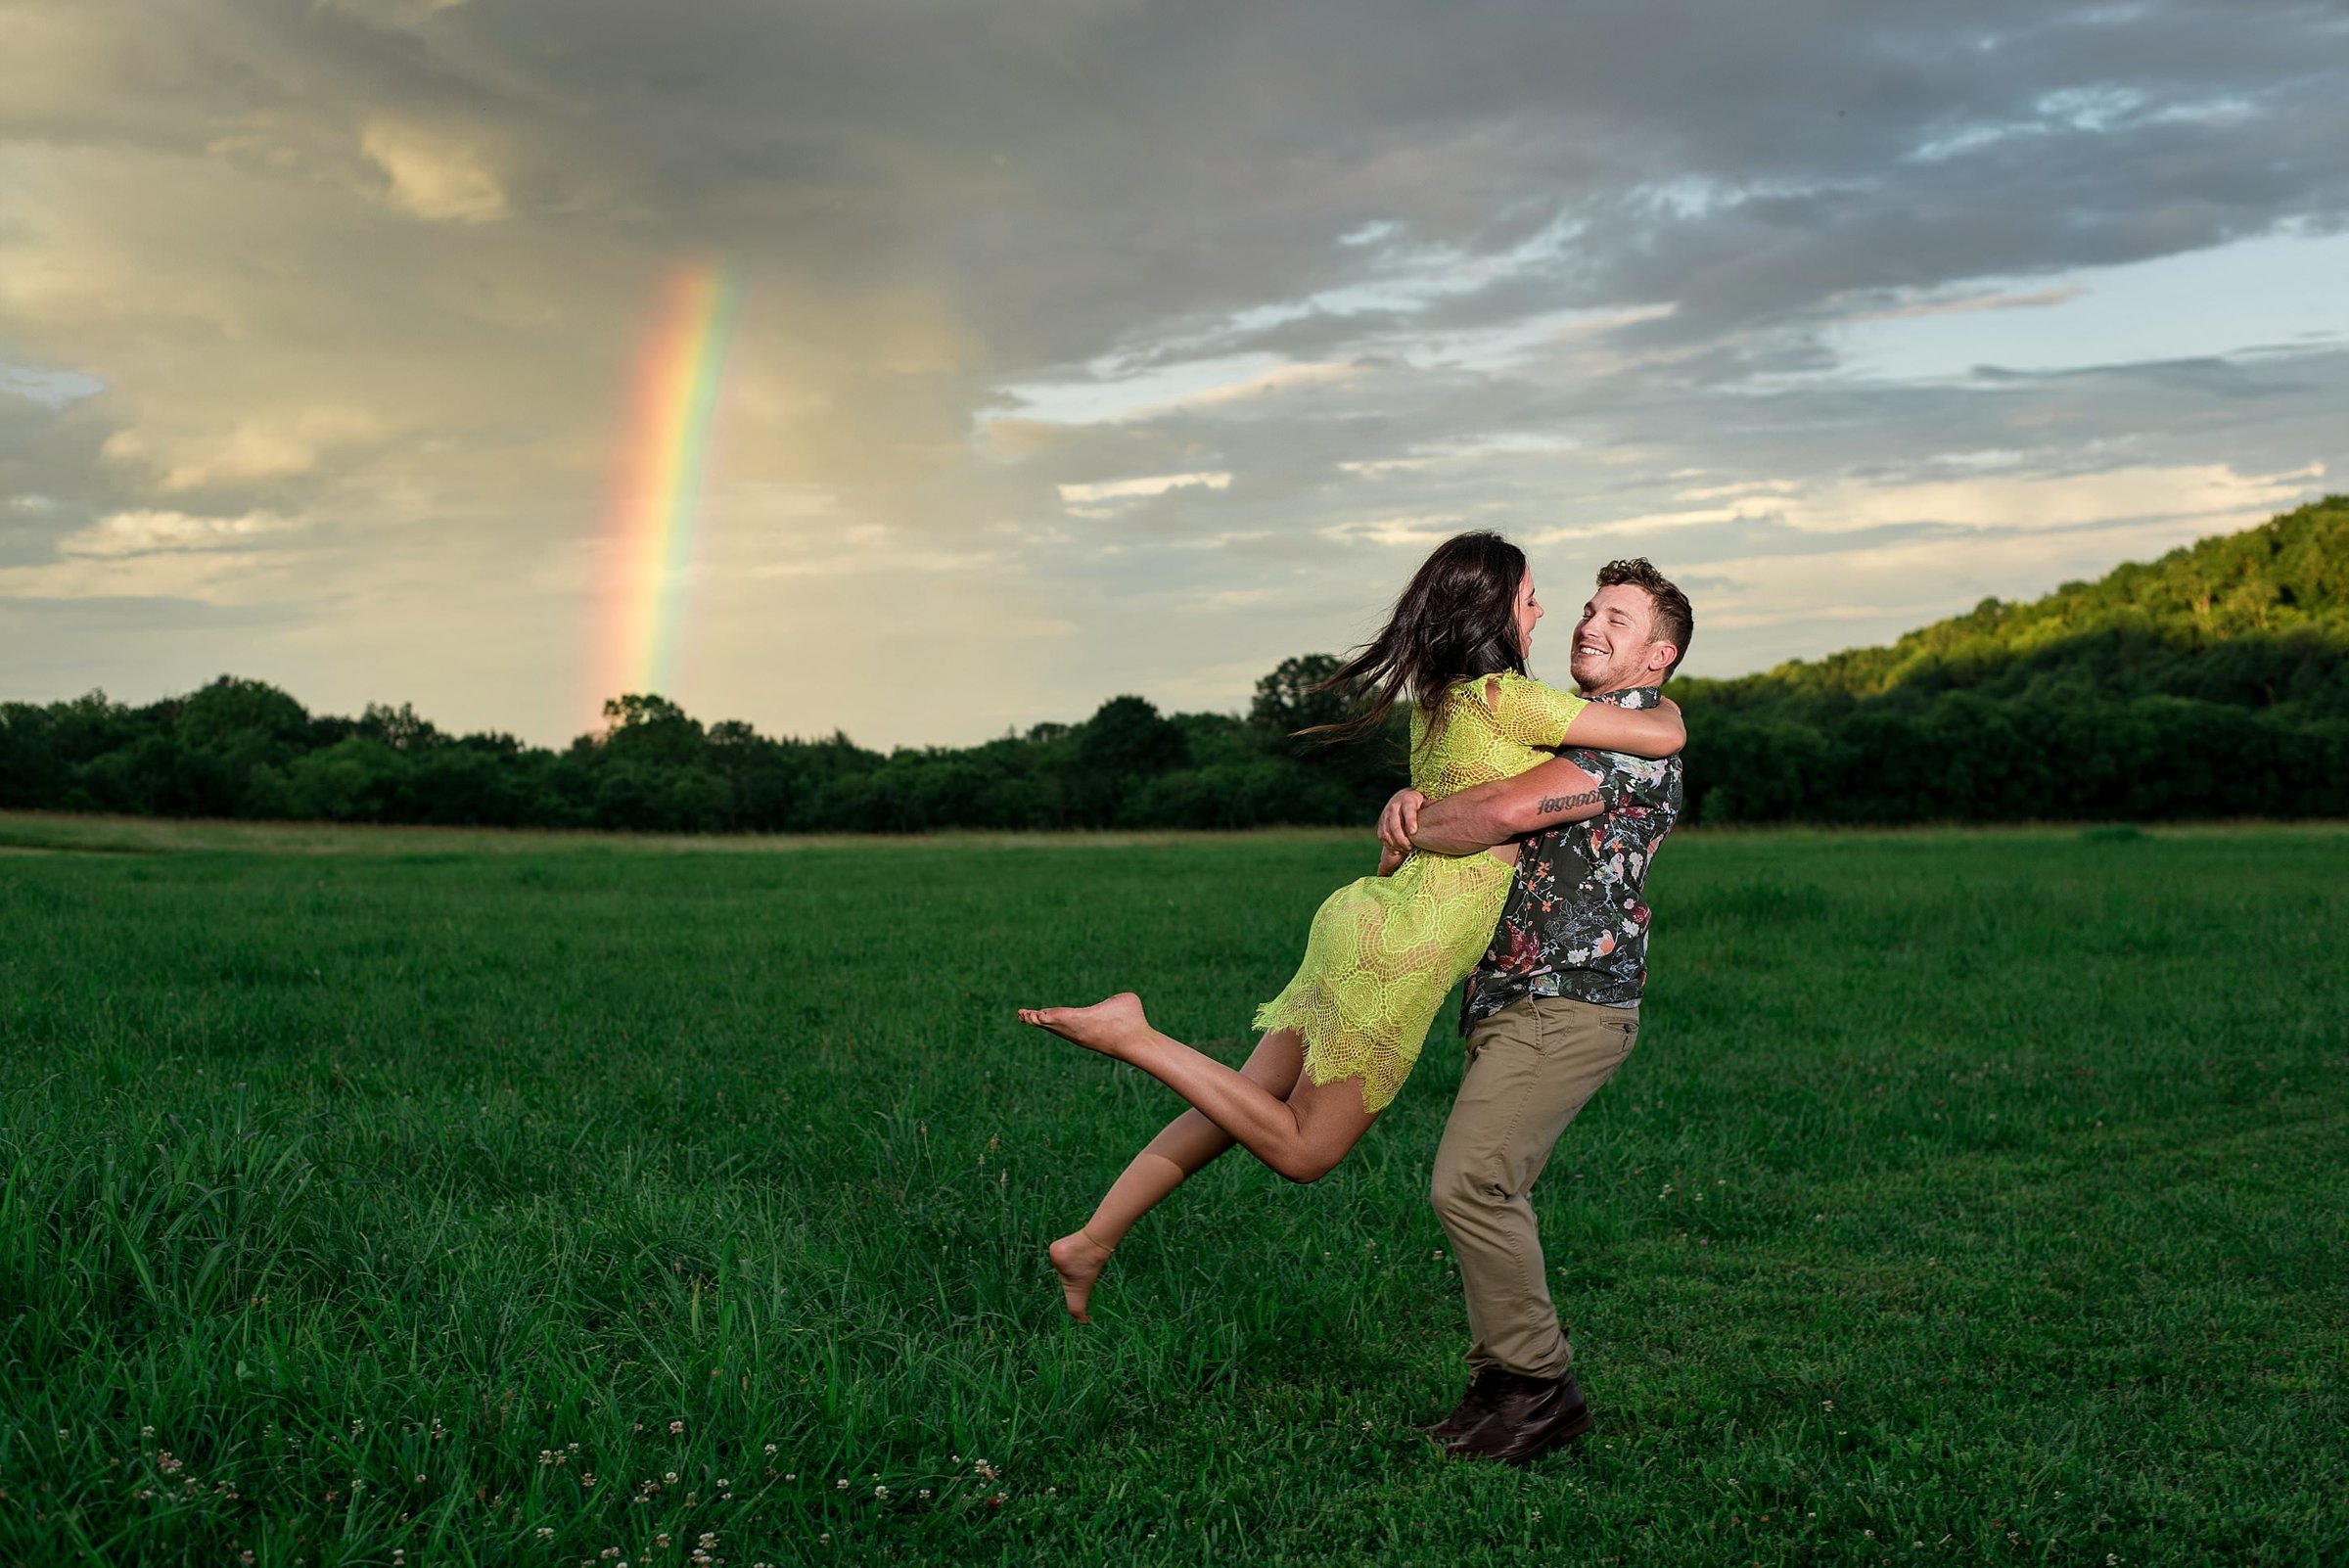 Bride wearing neon yellow short lace dress with her fiance spinning her in the middle of a grassy field at Drakewood Farm during sunset with a rainbow in the background